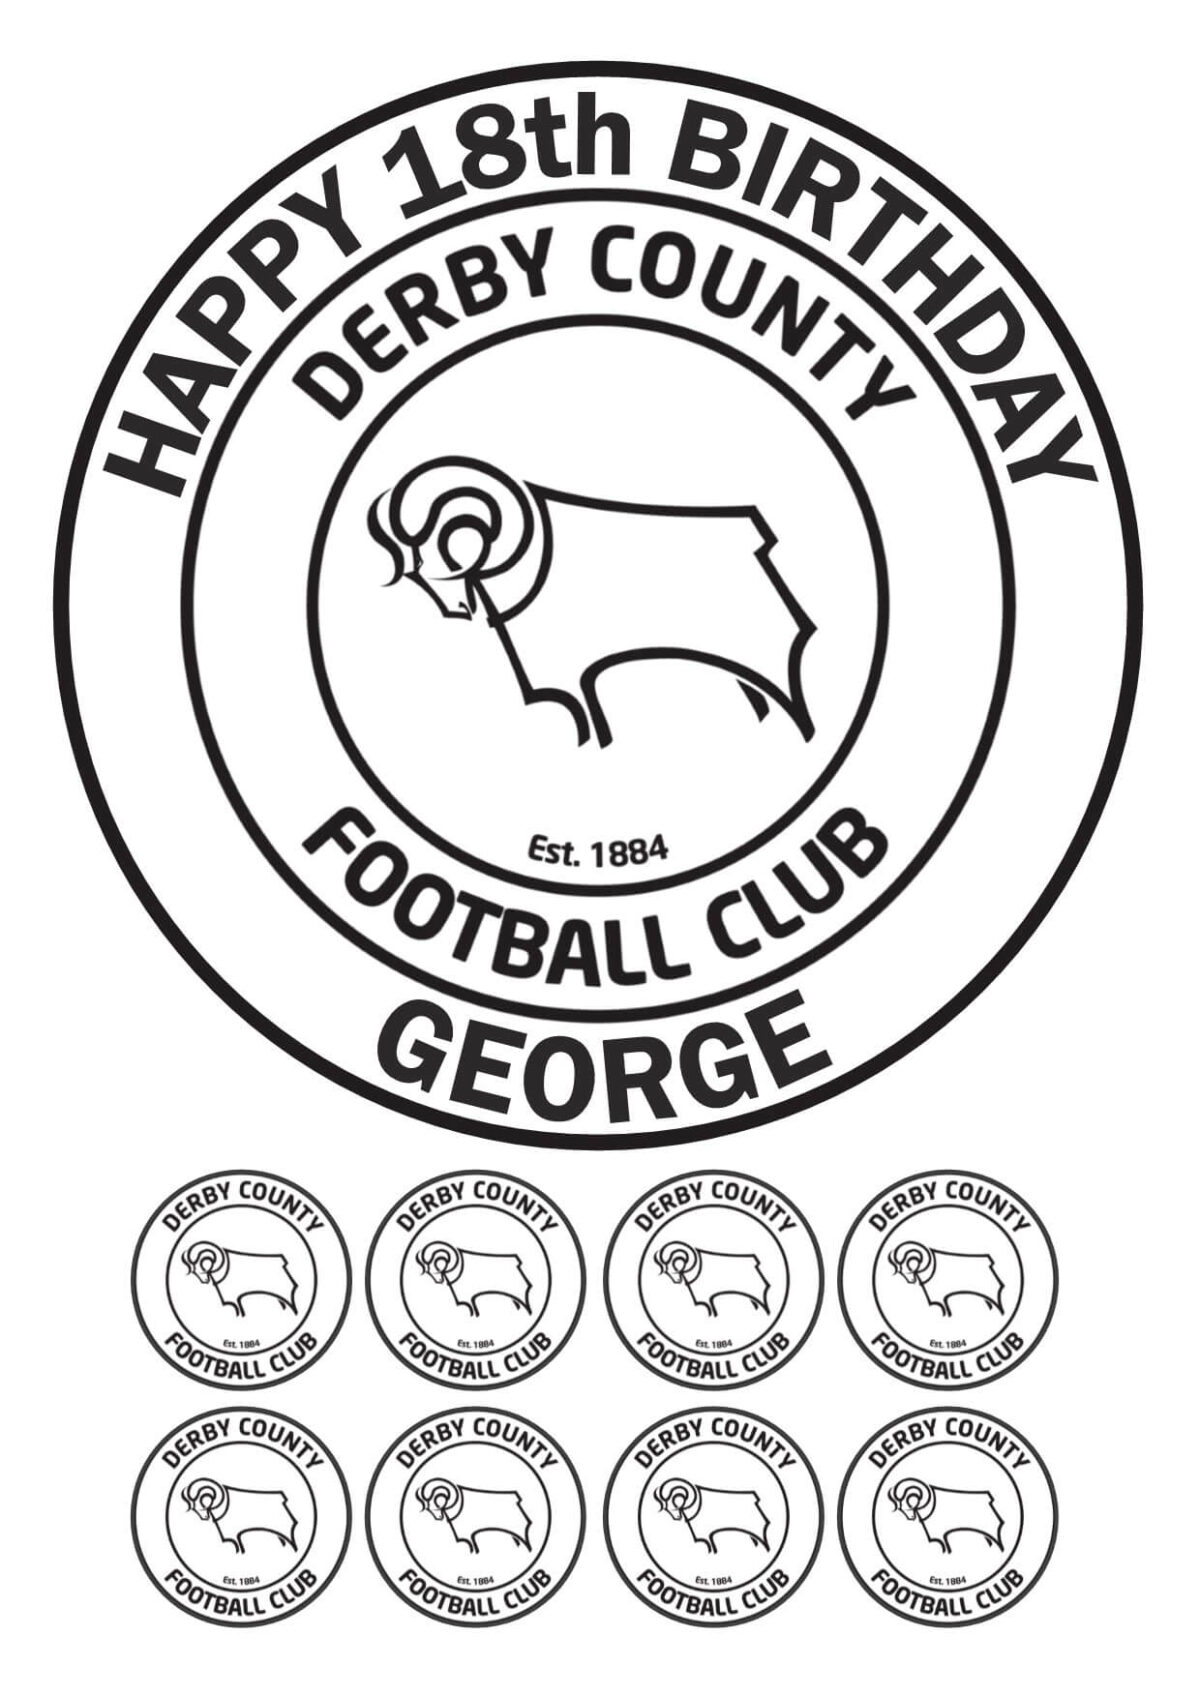 derby county fc ICING BIRTHDAY CAKE TOPPER & CUPCAKES